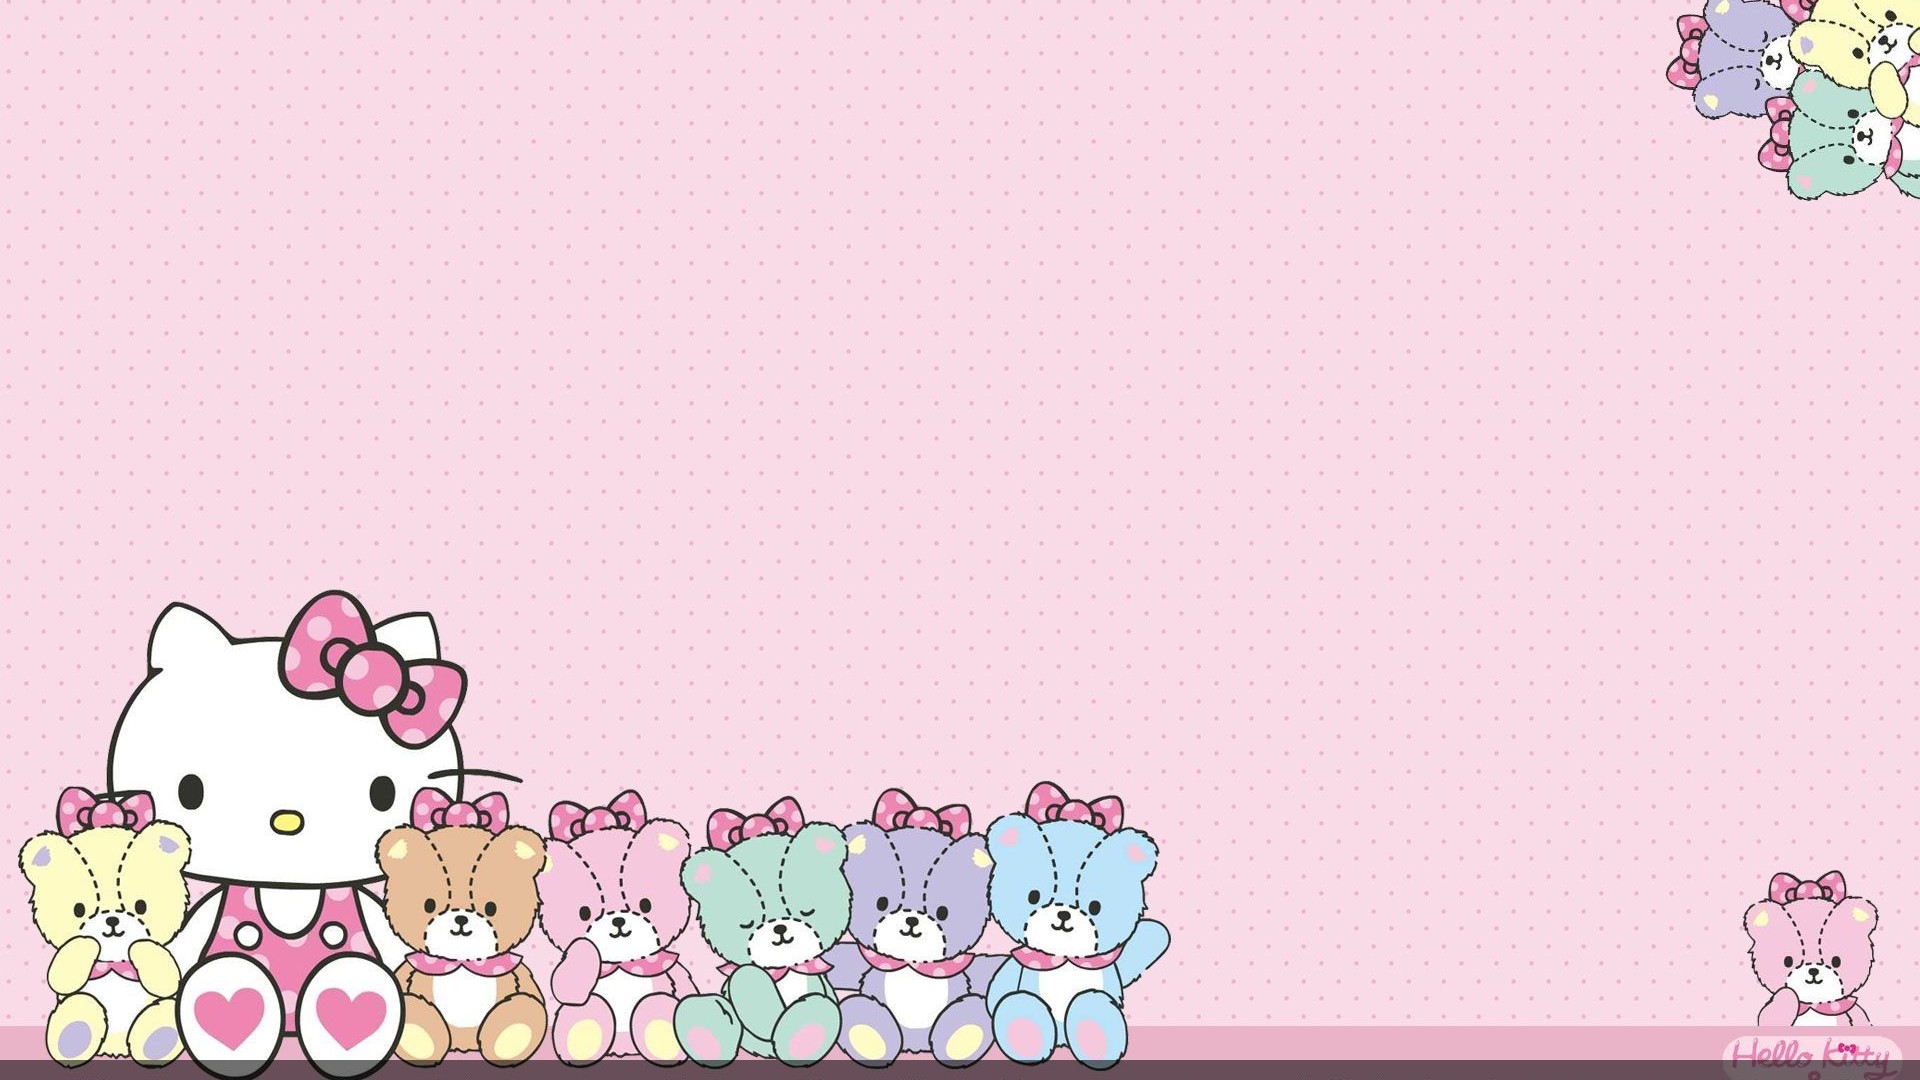 Hello Kitty Desktop Wallpaper with resolution 1920X1080 pixel. You can use this wallpaper as background for your desktop Computer Screensavers, Android or iPhone smartphones